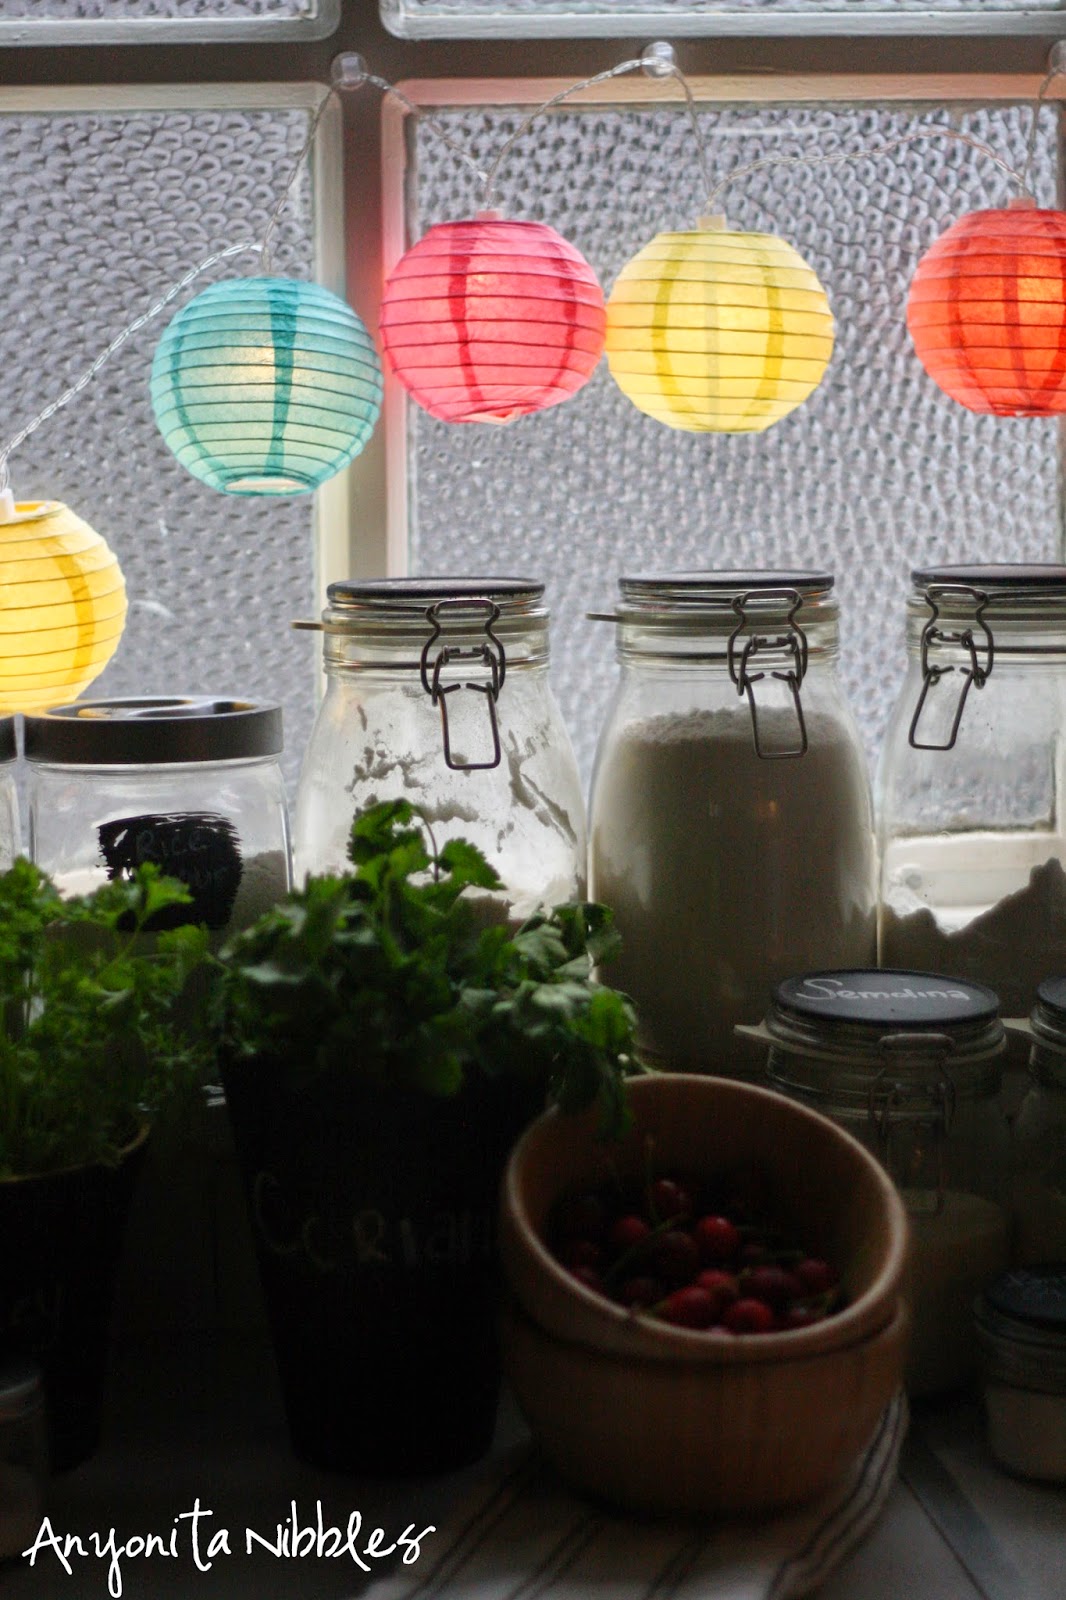 Paper lanterns add pop of color to a basic kitchen from Anyonita Nibbles